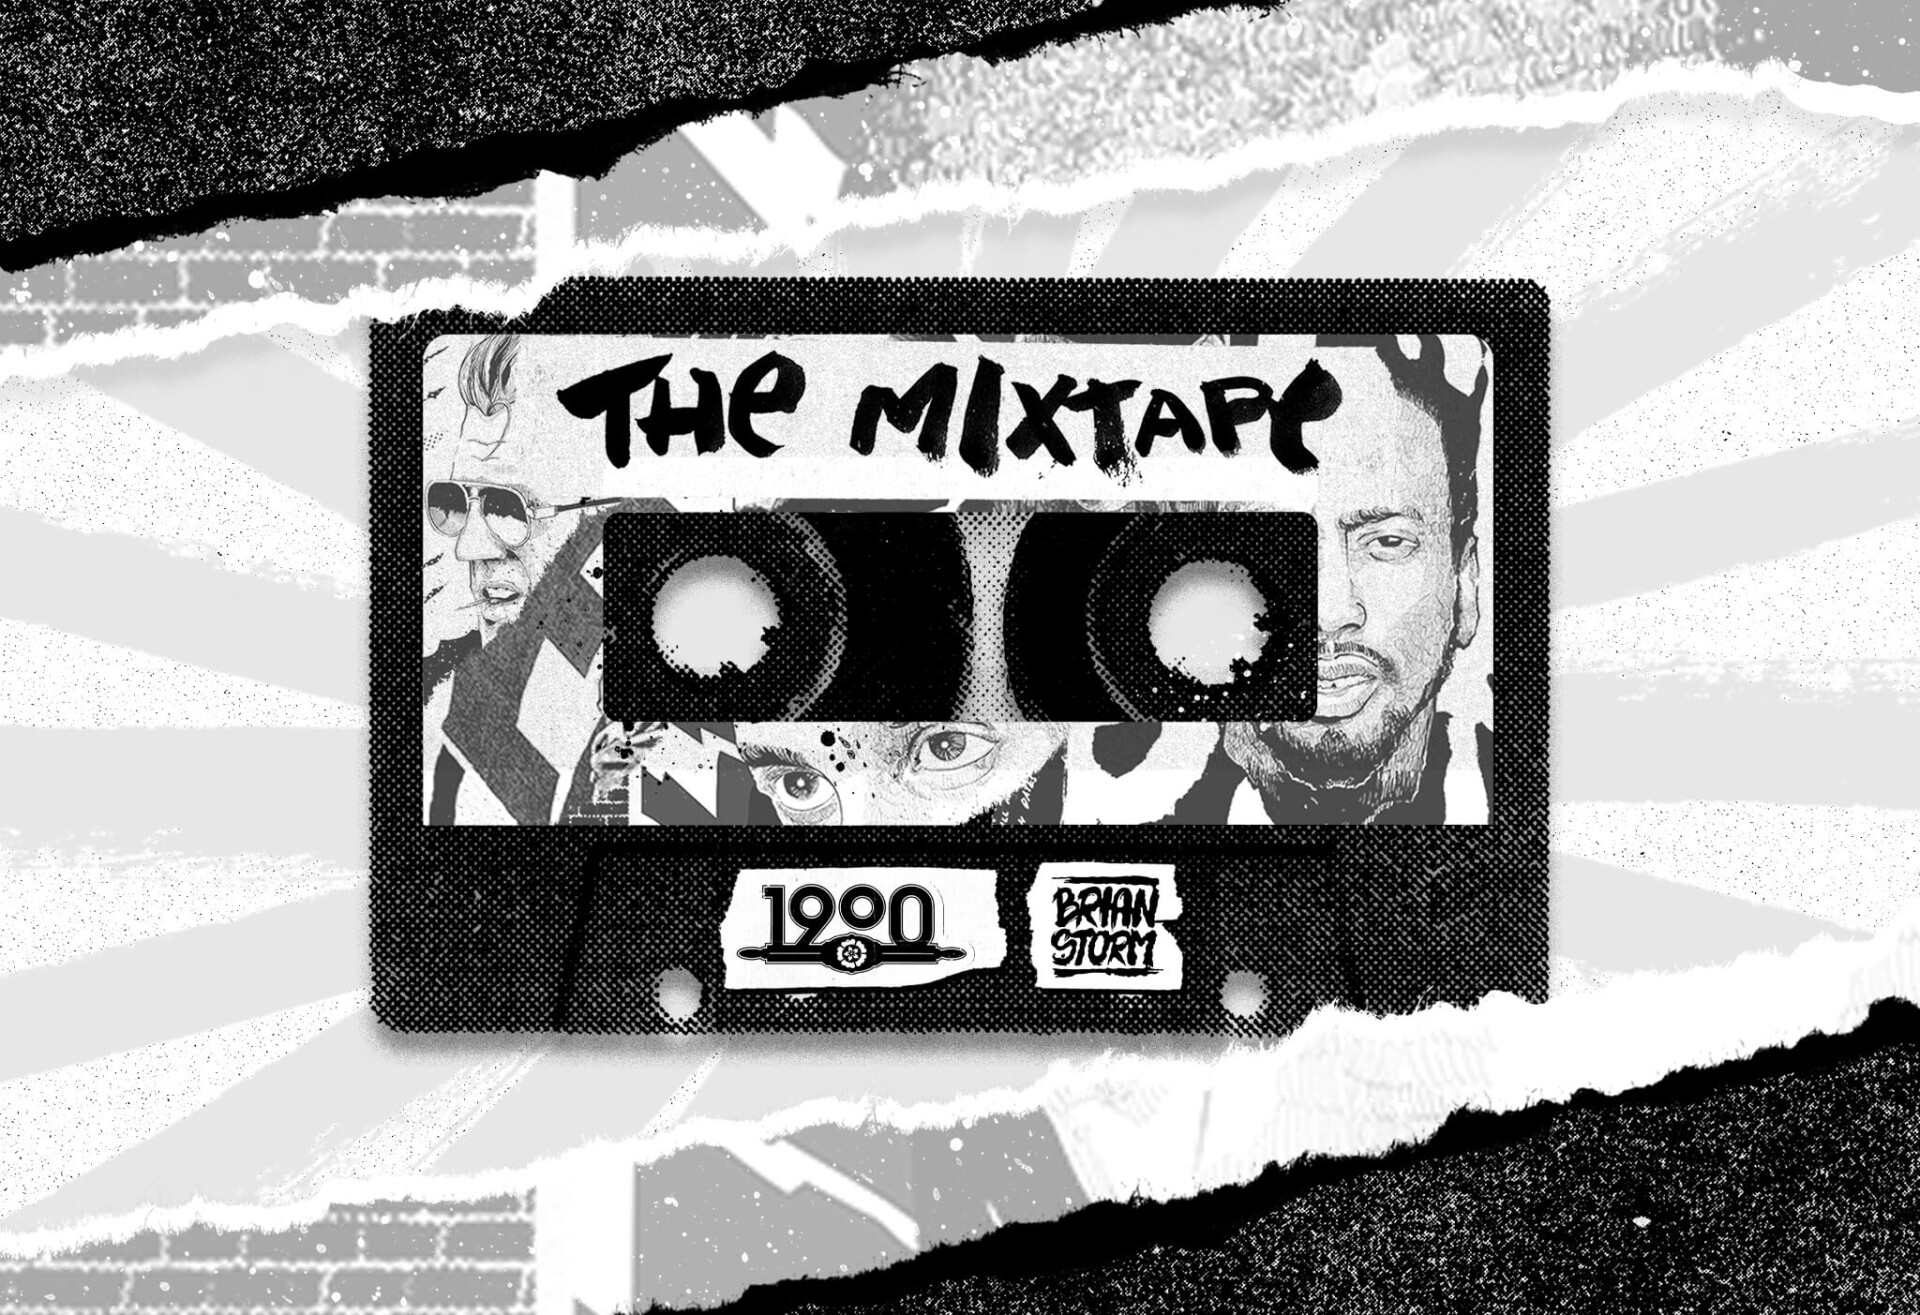 Brian Storm - Illustration & Design The Mixtape Exhibition at 1900 Gallery